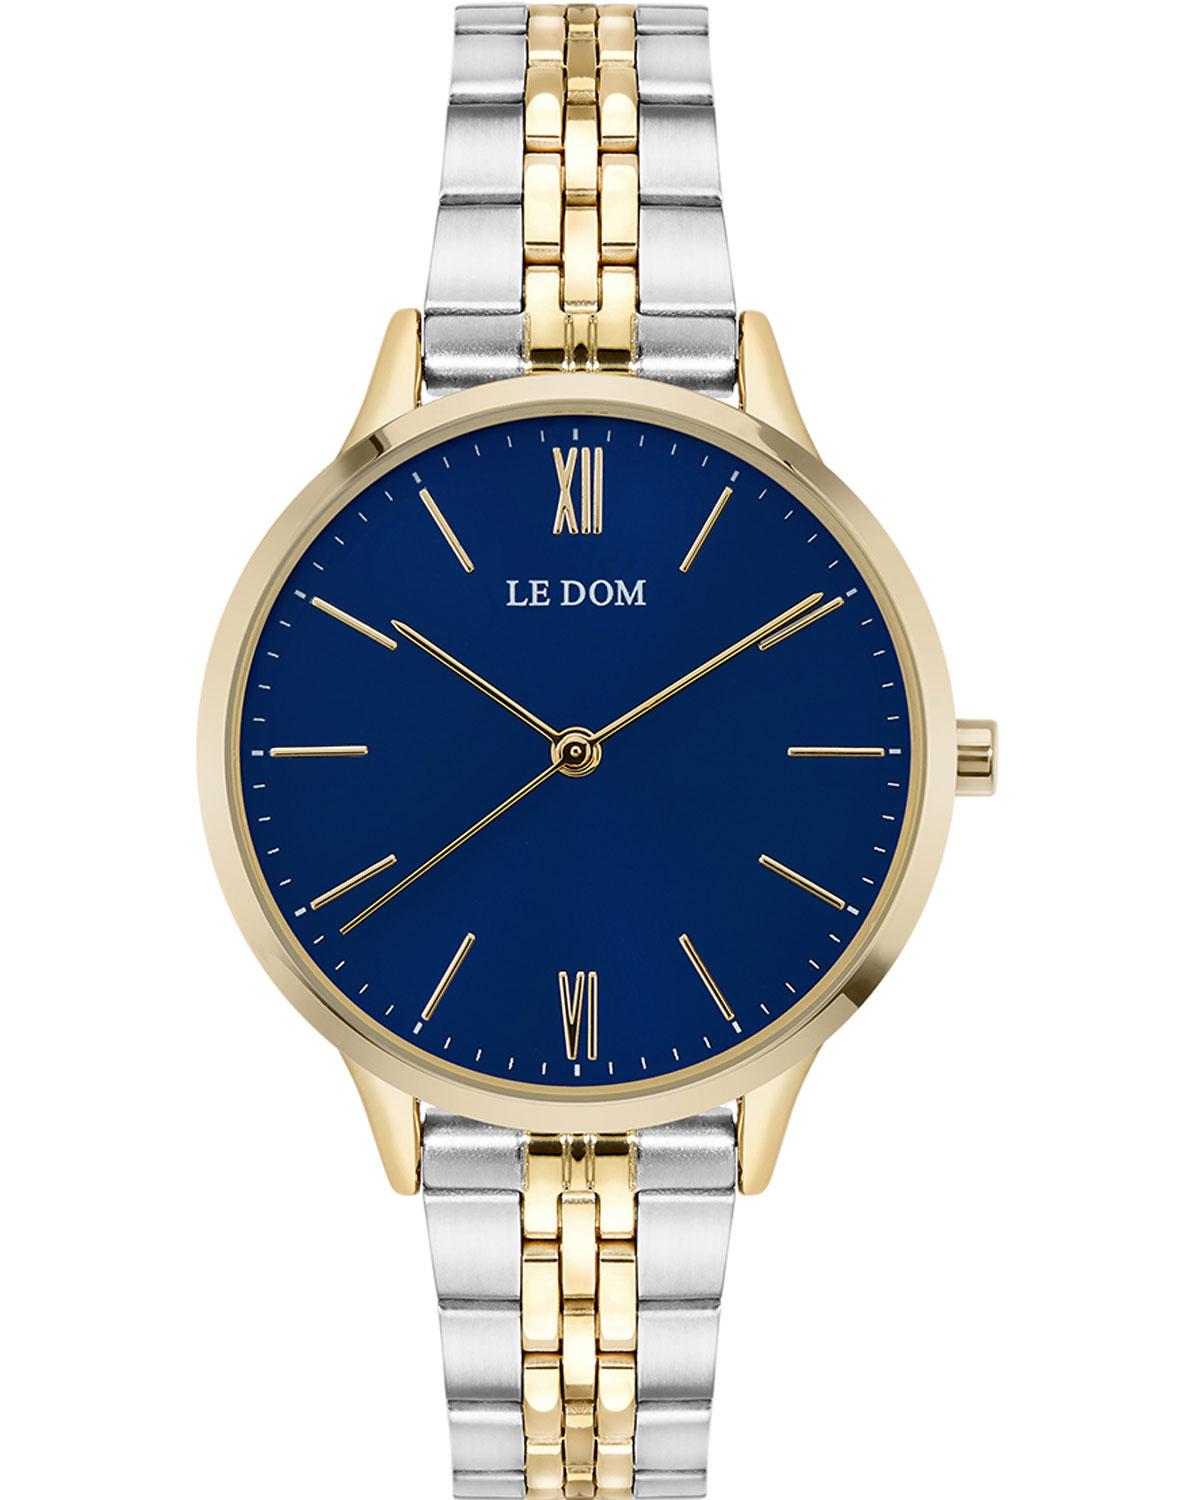 le dom essence ld 1275 2 gold case with stainless steel bracelet image1